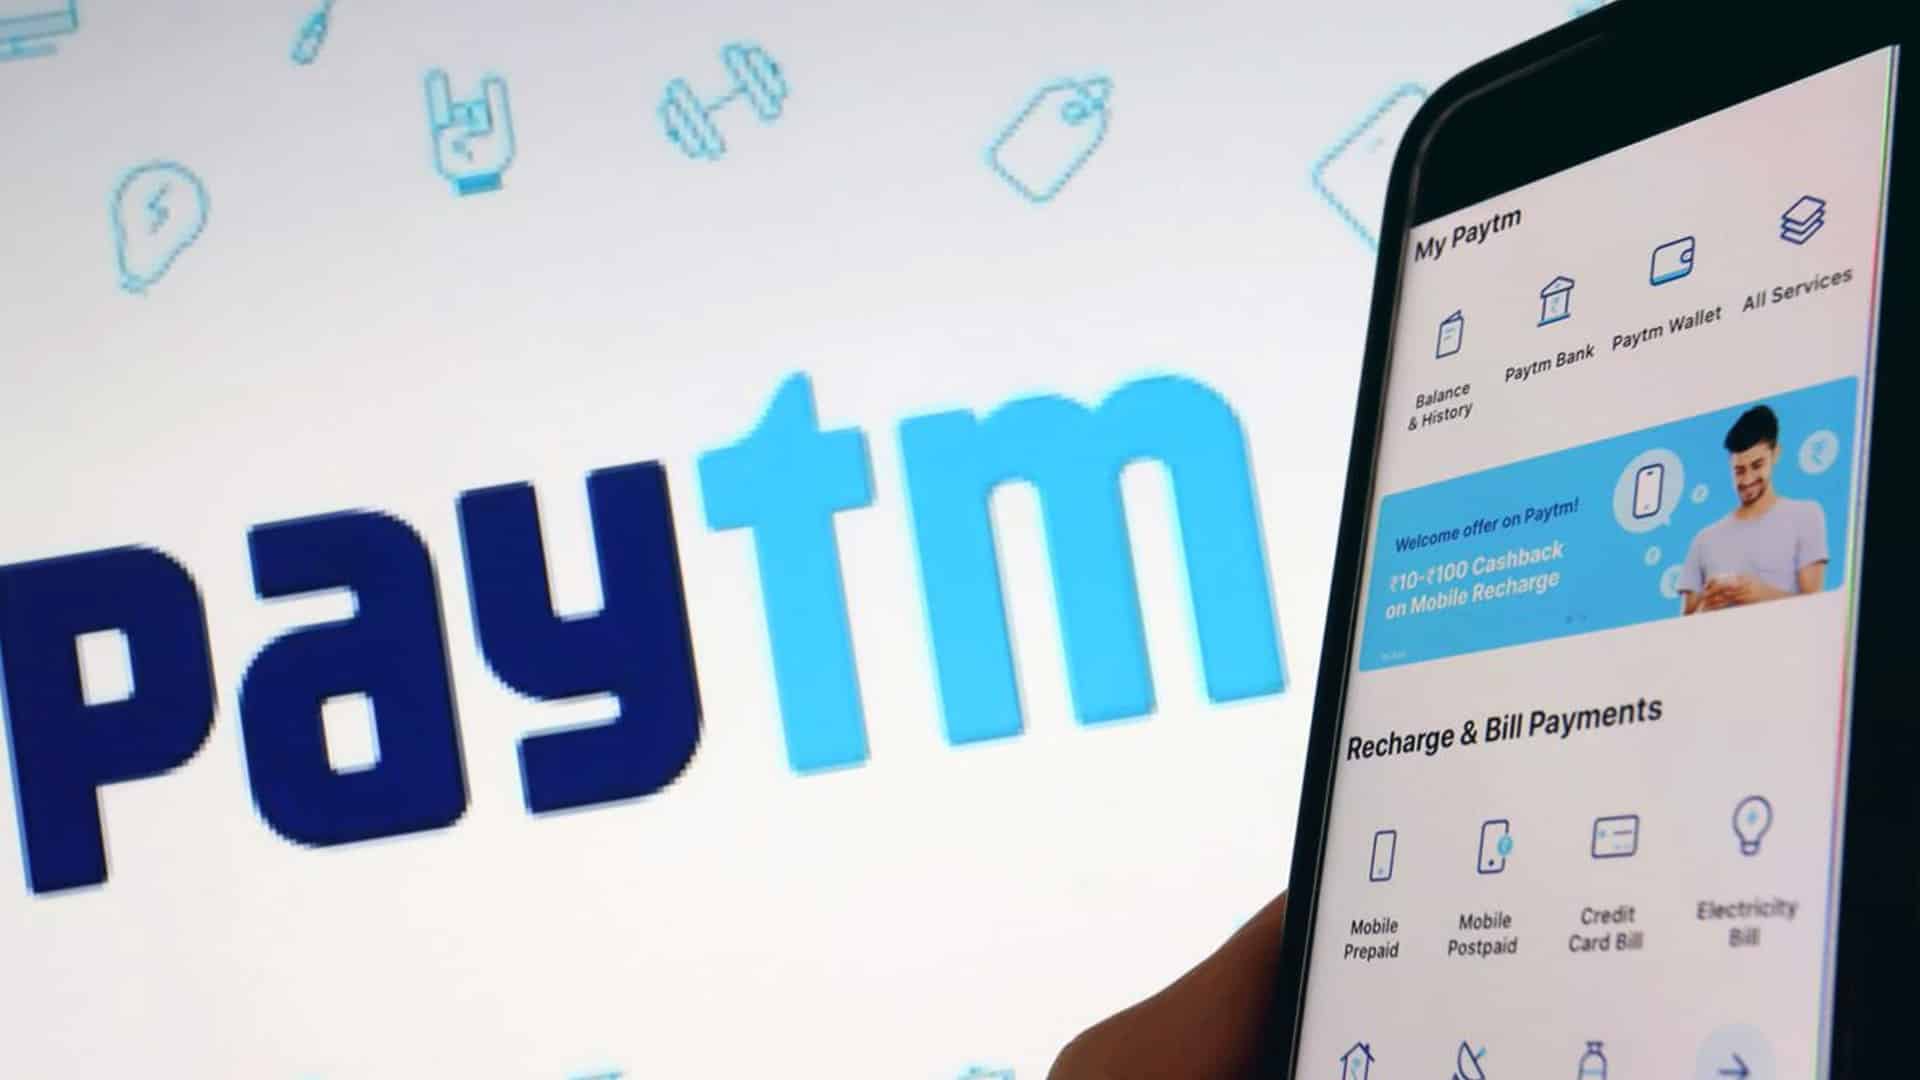 Paytm Payments Bank gets final RBI nod to operate as Bharat Bill Payment Operating Unit